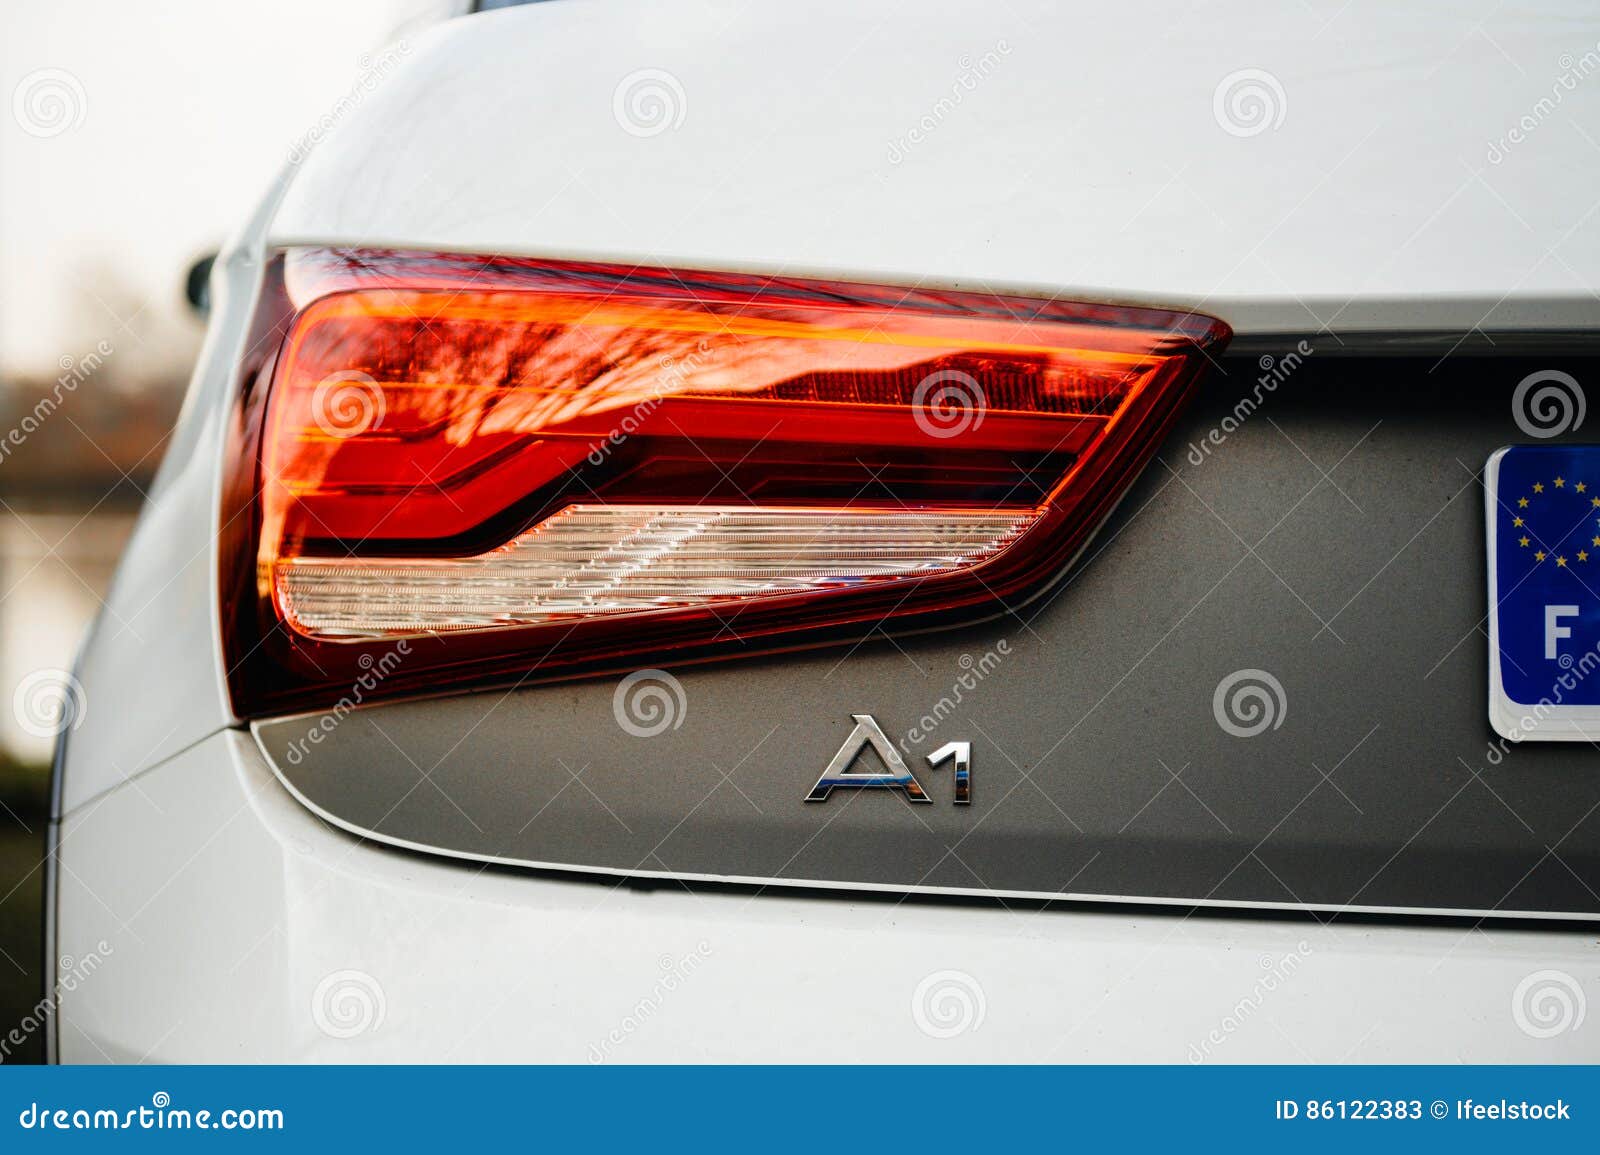 program surround roof Audi A1 Rear Light Led Detail Editorial Stock Photo - Image of cars,  design: 86122383